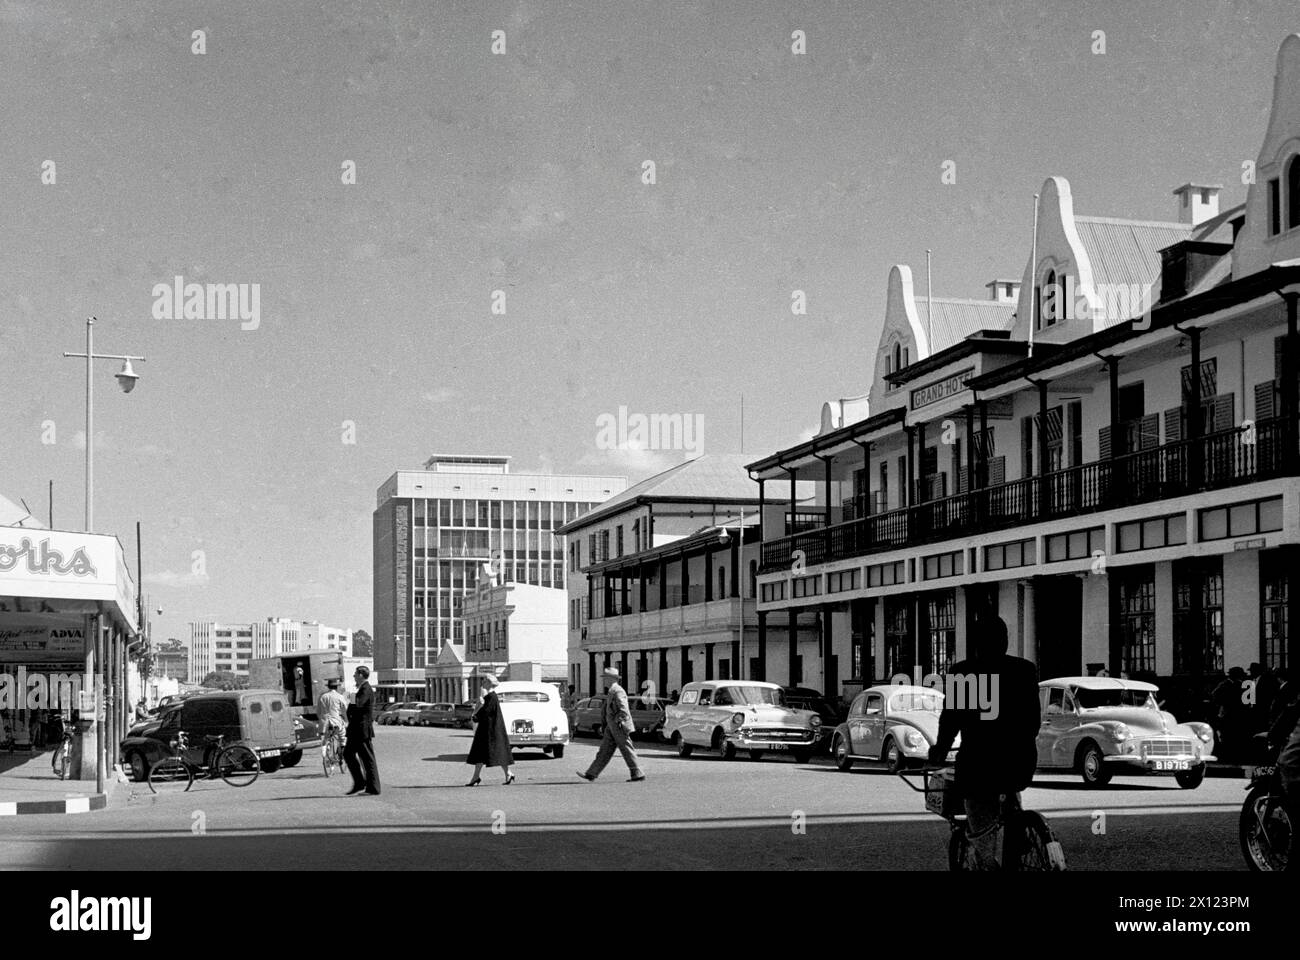 Grande Hotel on First Street Salisbury Rhodesia, now Harare Zimbabwe. The Colonial Era Building was Designed by James Cope-Christie and Thomas Sladden in 1914. Vintage or Historic Monochrome or Black and White Image c1960 Stock Photo